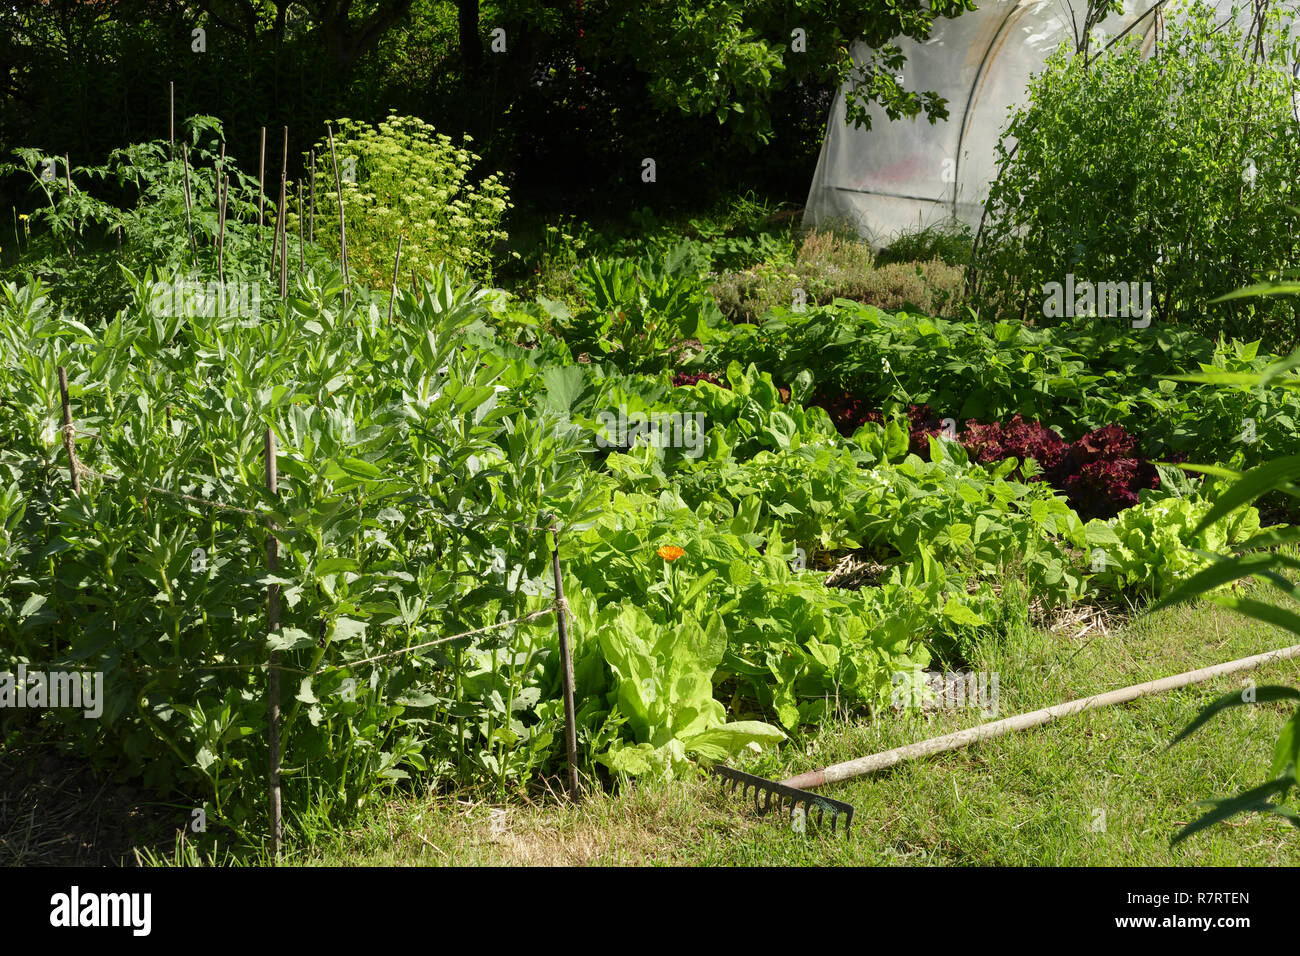 Vegetables growing in the garden (broad beans, salads, green beans, peas supported by canes, plants of tomatoes,  parsley, zucchini plants). Stock Photo